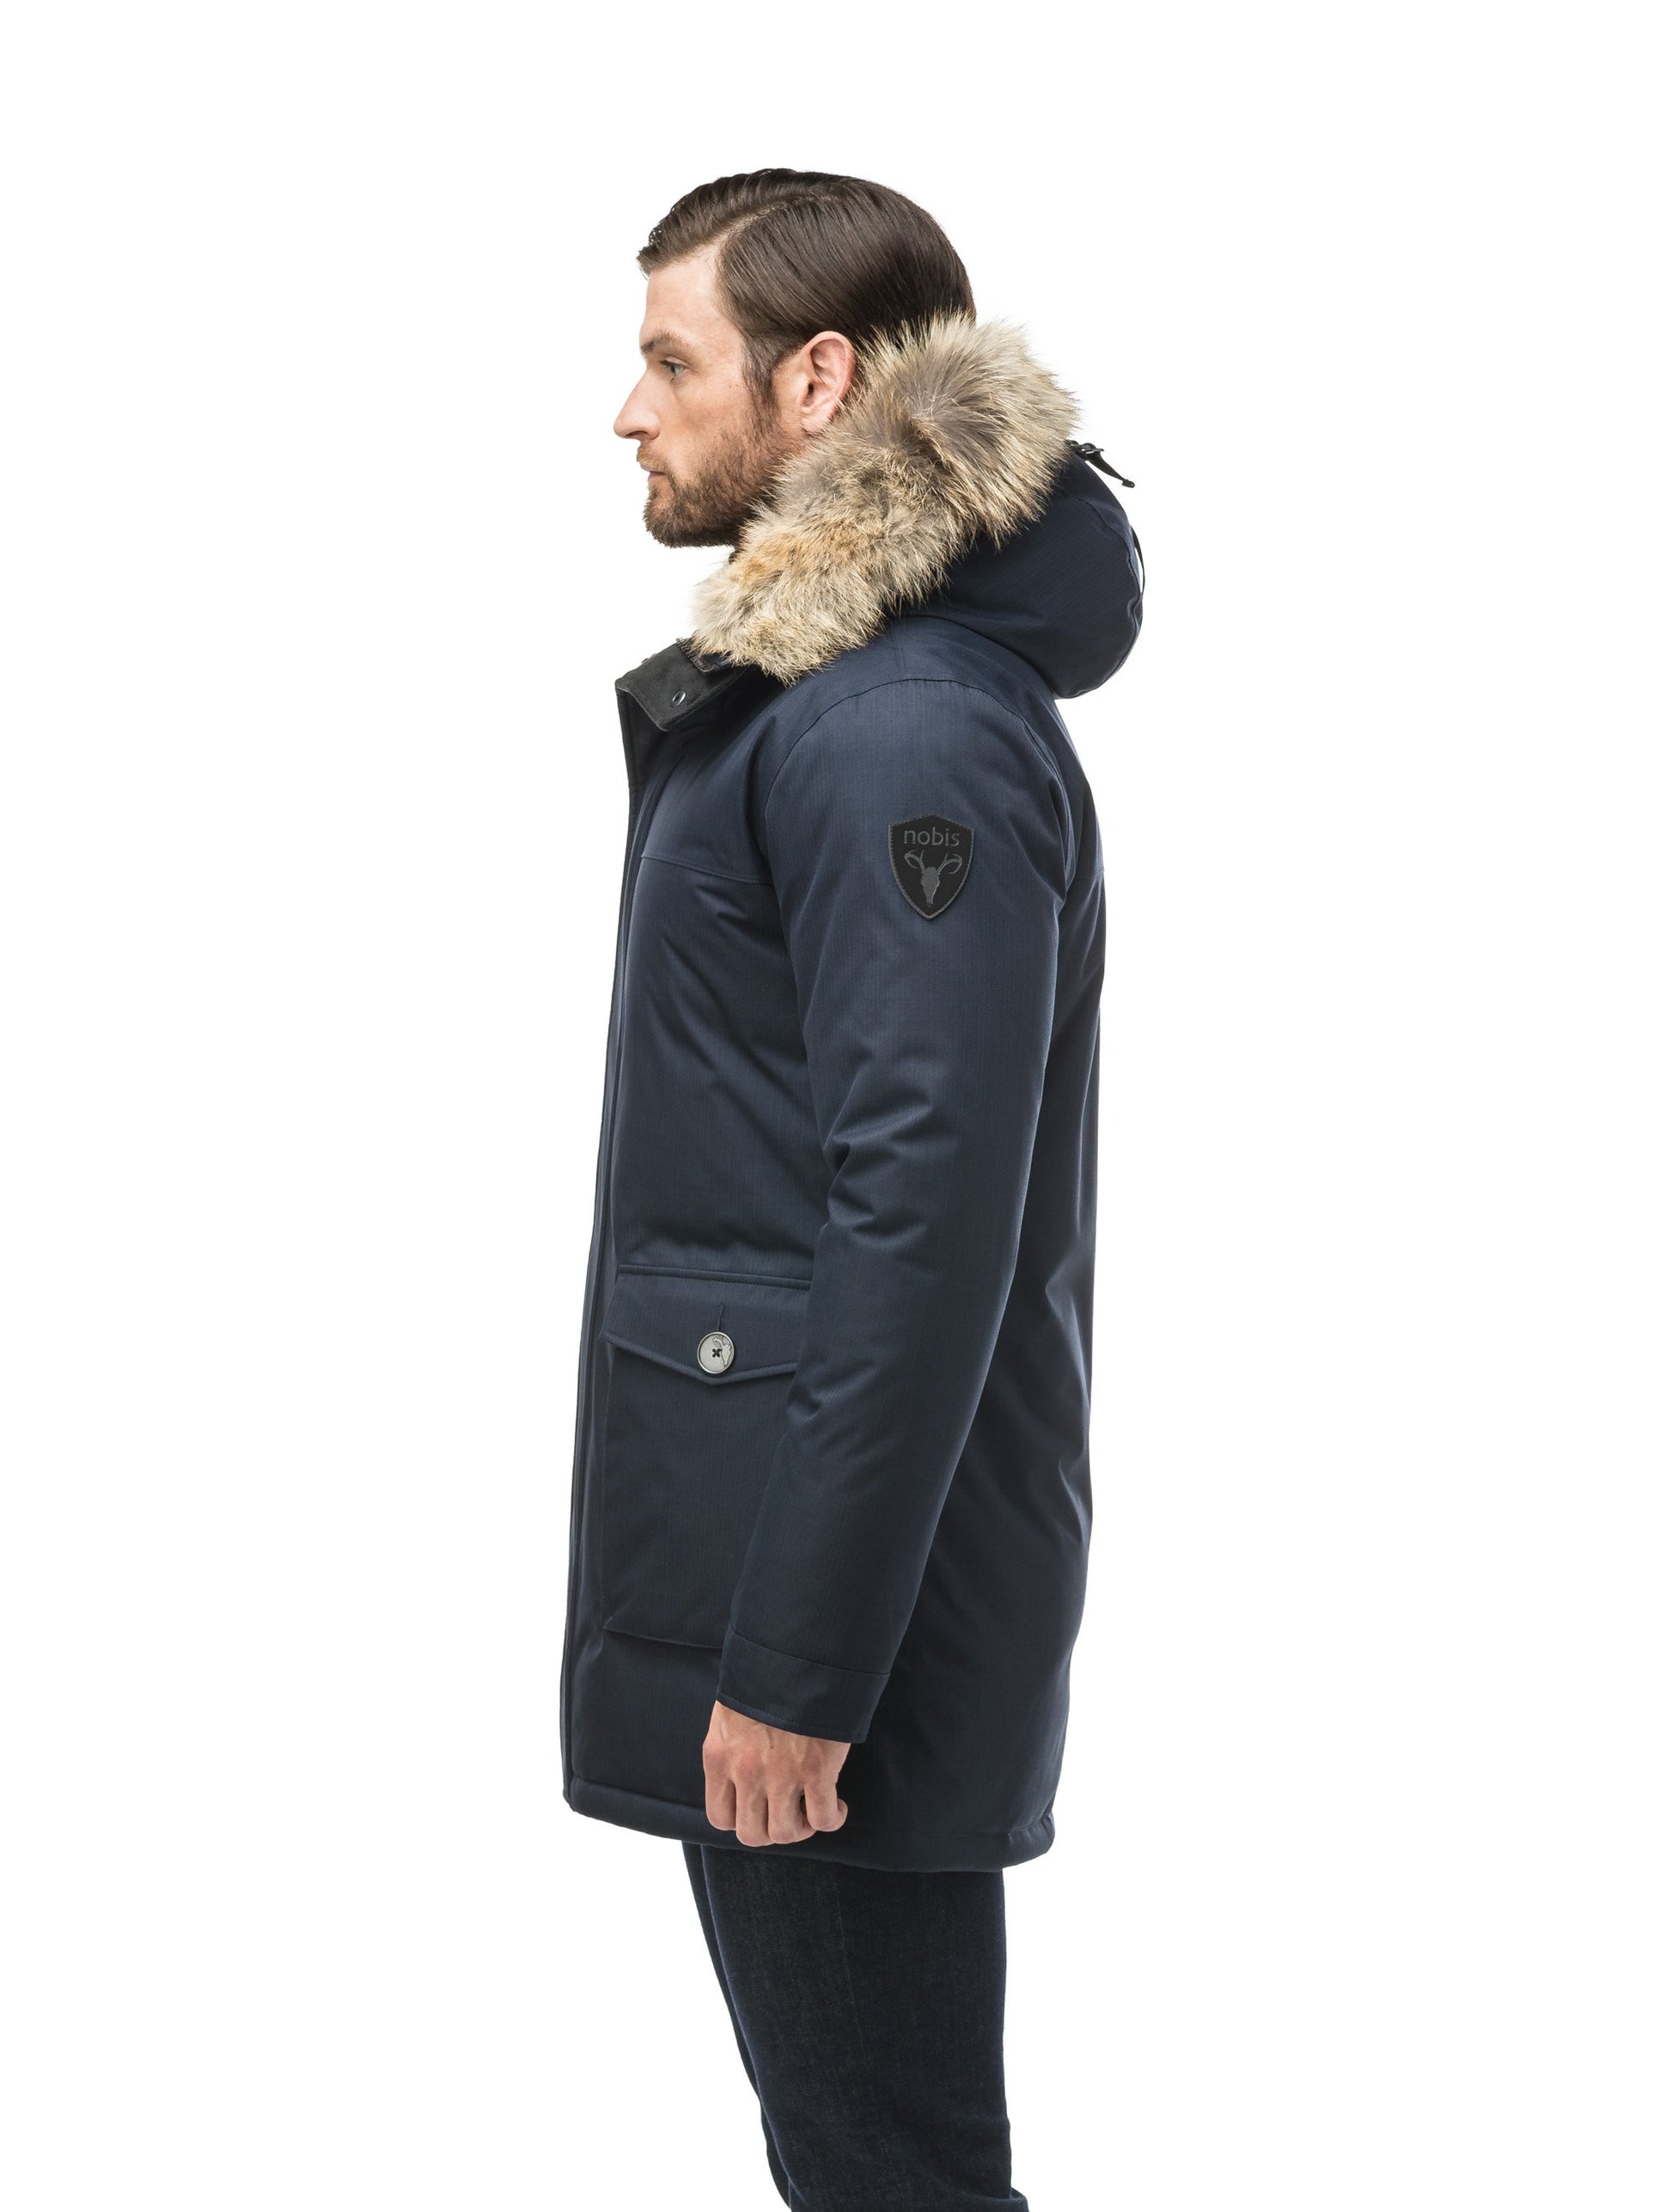 Men's slim fitting waist length parka with removable fur trim on the hood and two waist patch pockets in CH Navy